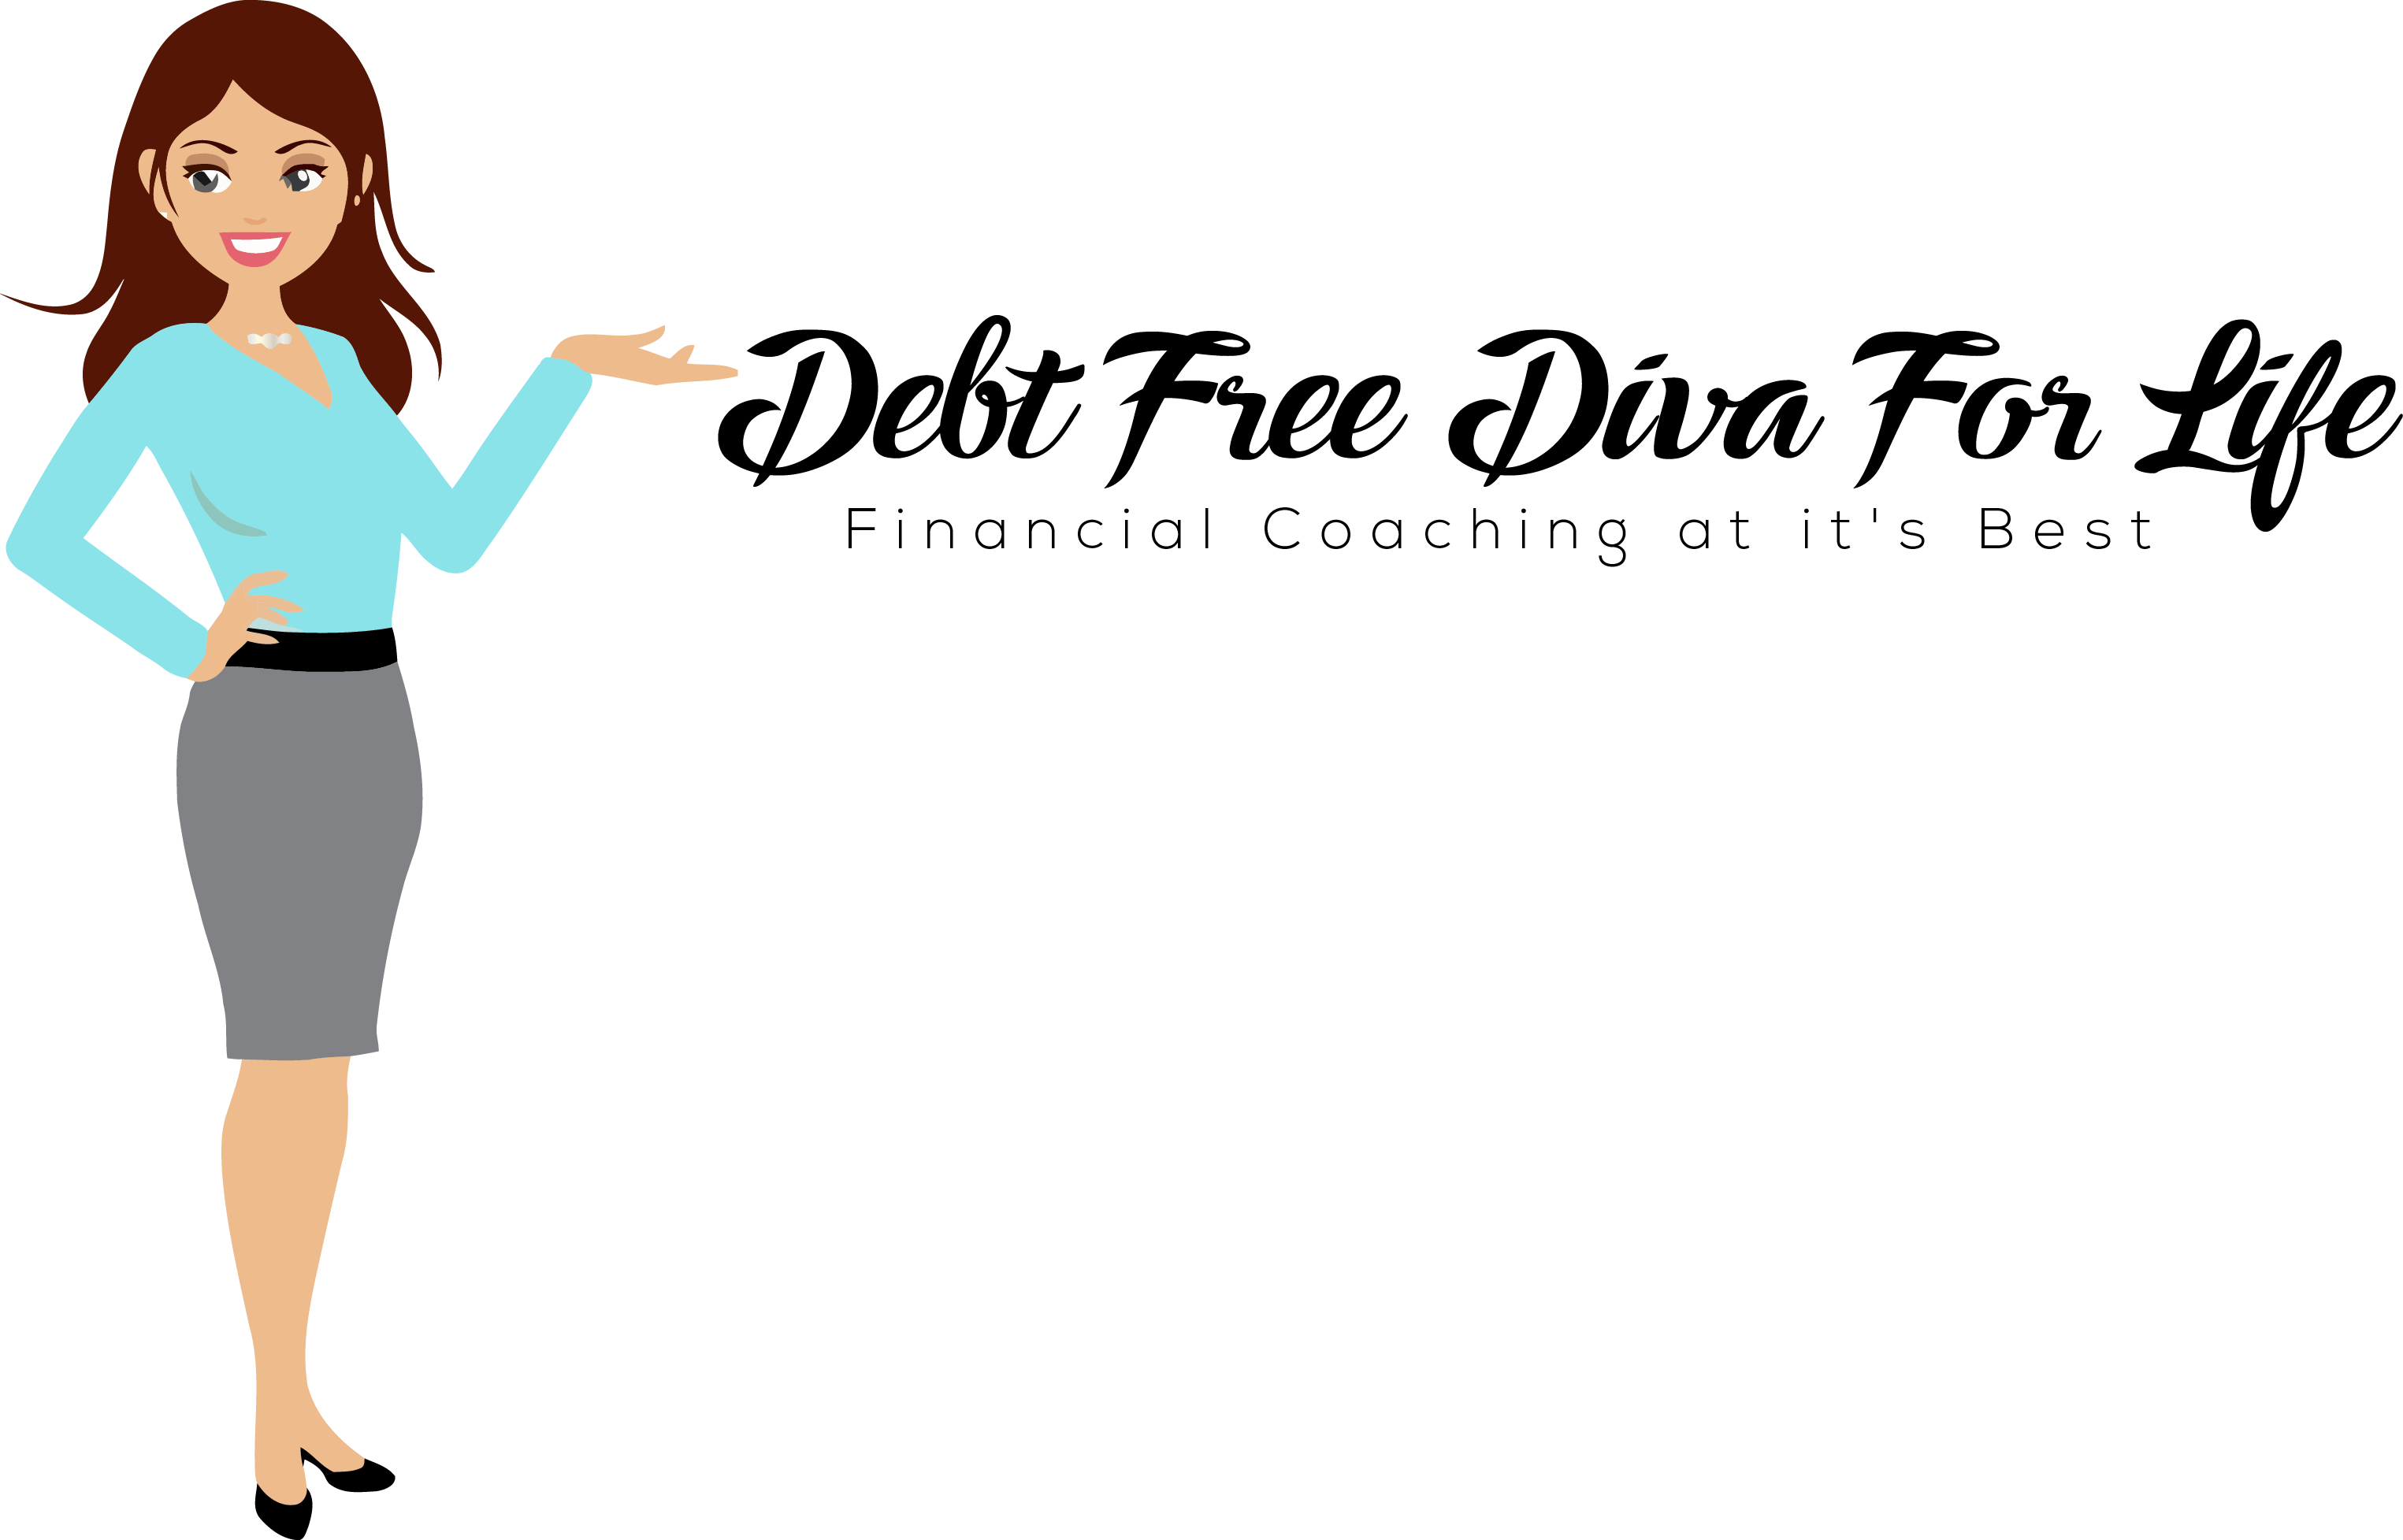 Debt Free Diva For Life - Diva, Transparent background PNG HD thumbnail